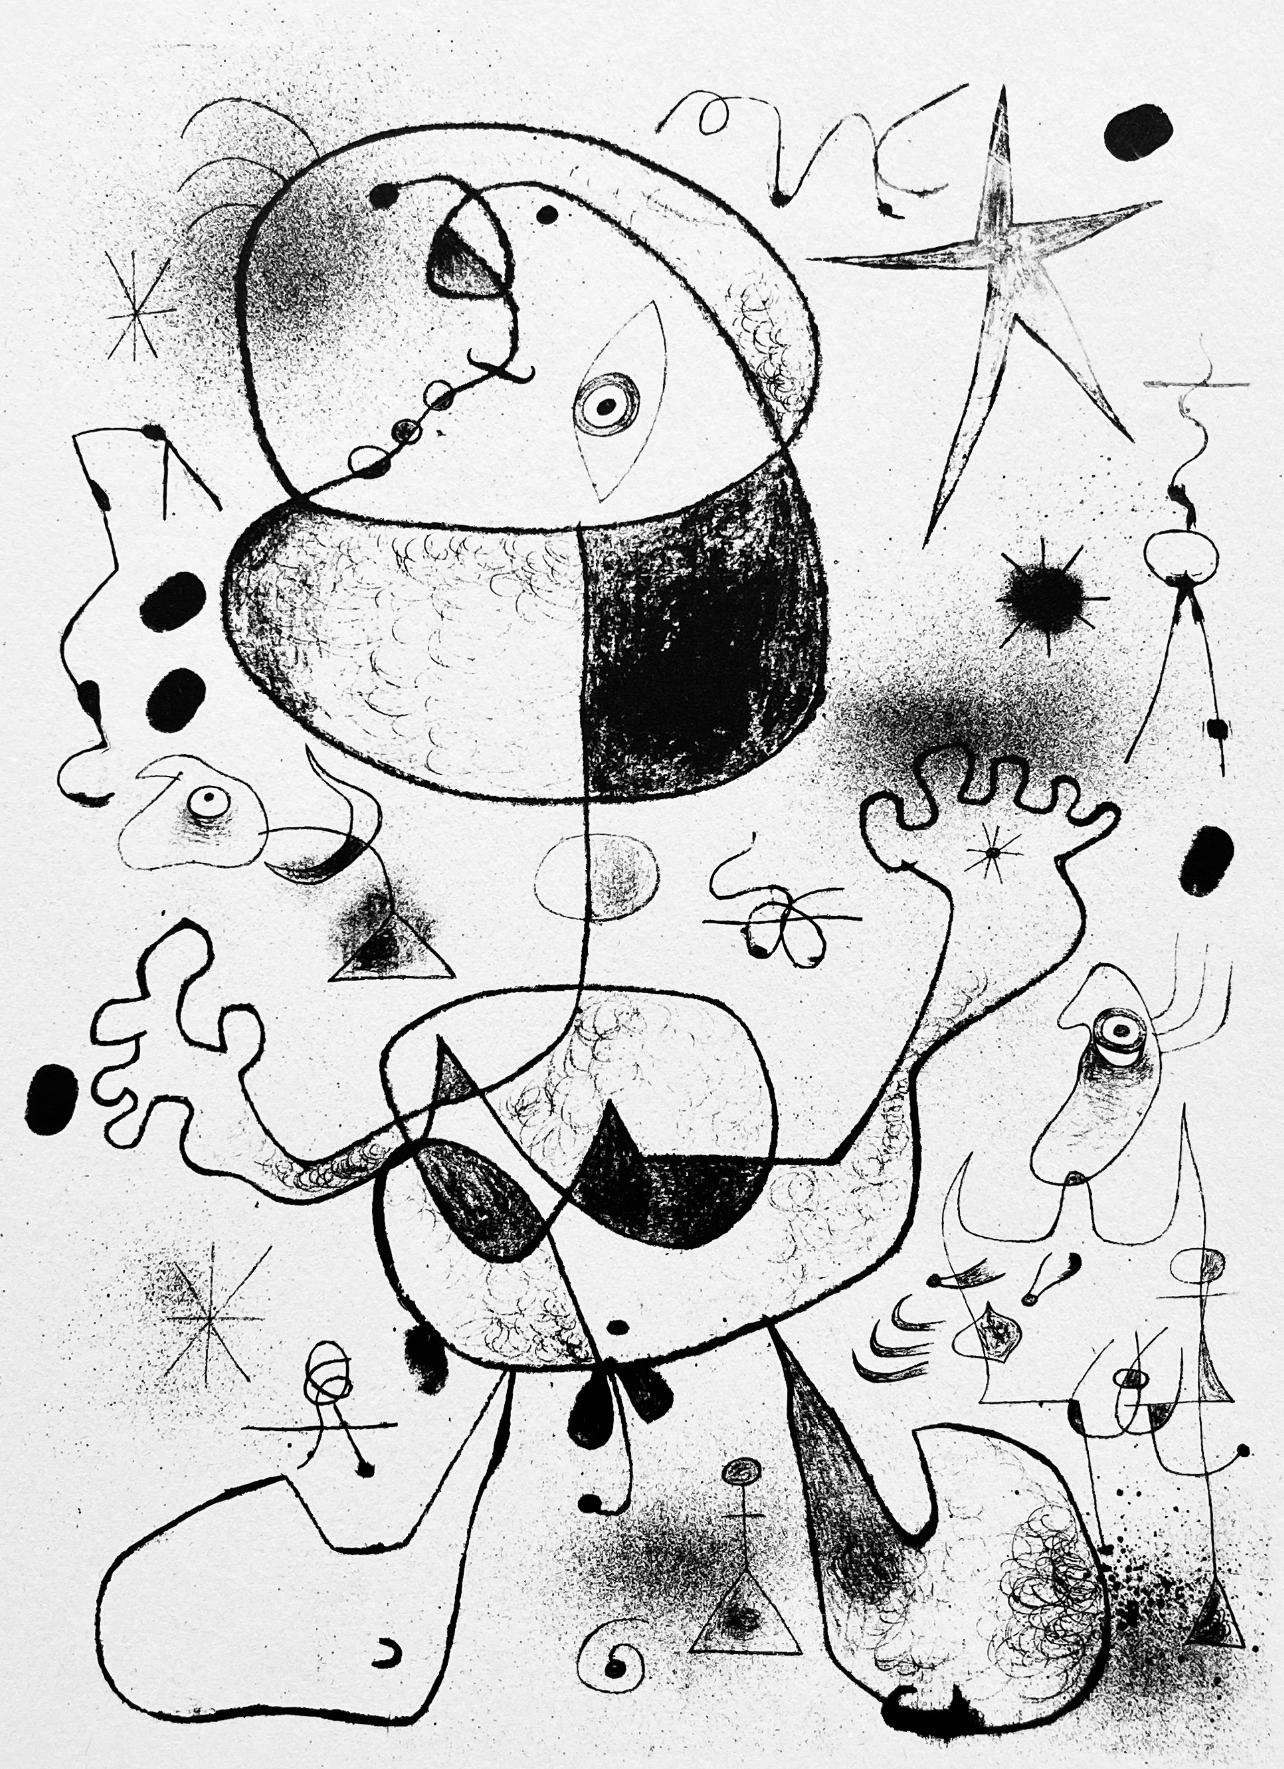 Joan Miró Abstract Print - Miro, Composition, The Prints of Joan Miro (after)